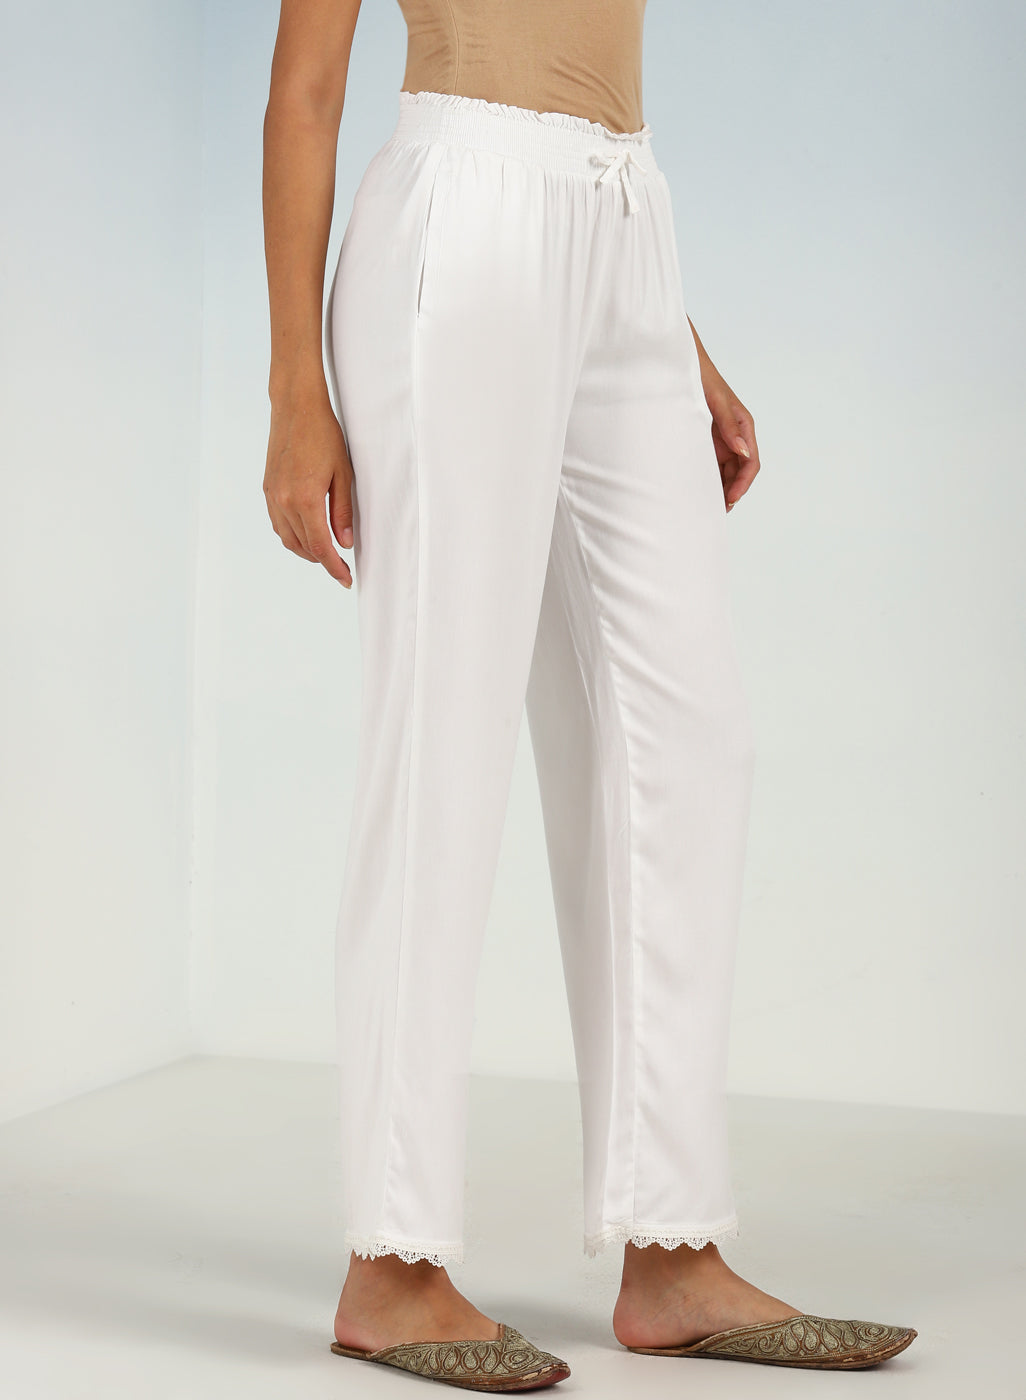 Ankle Length Pants In Chamba  Women Ankle Length Pants